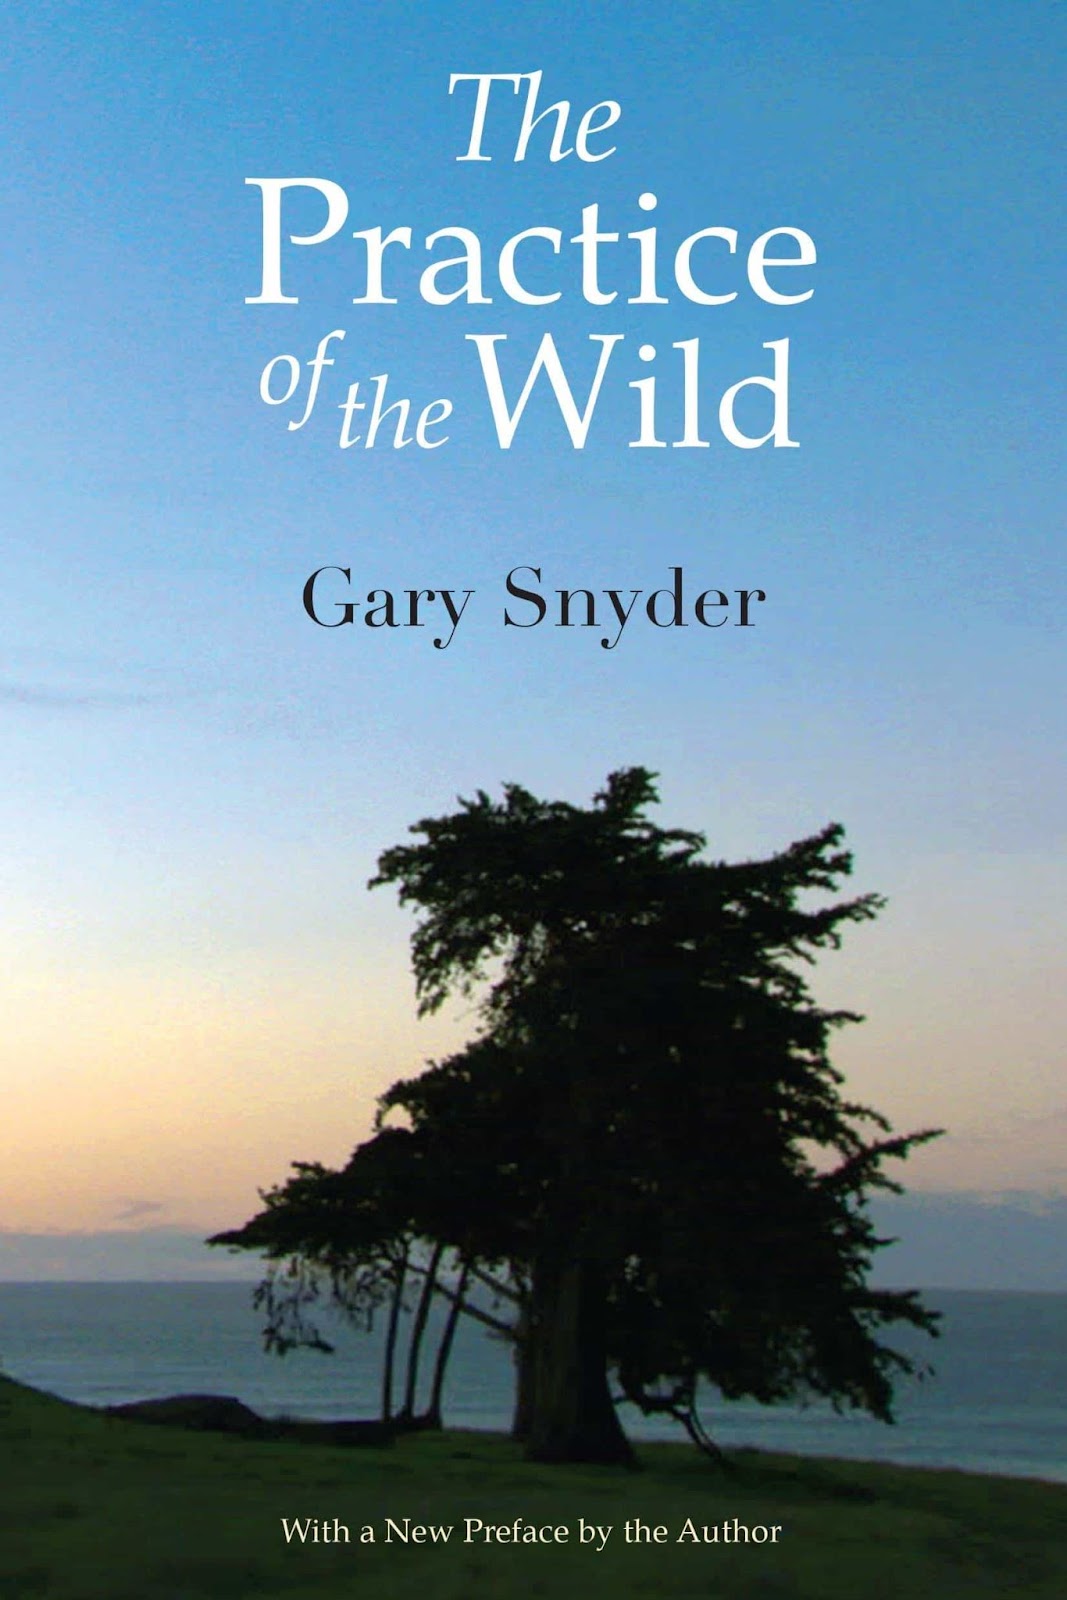 Cover of 'The Practice of the Wild' book with silhouette of tree against evening (or dawn) sky